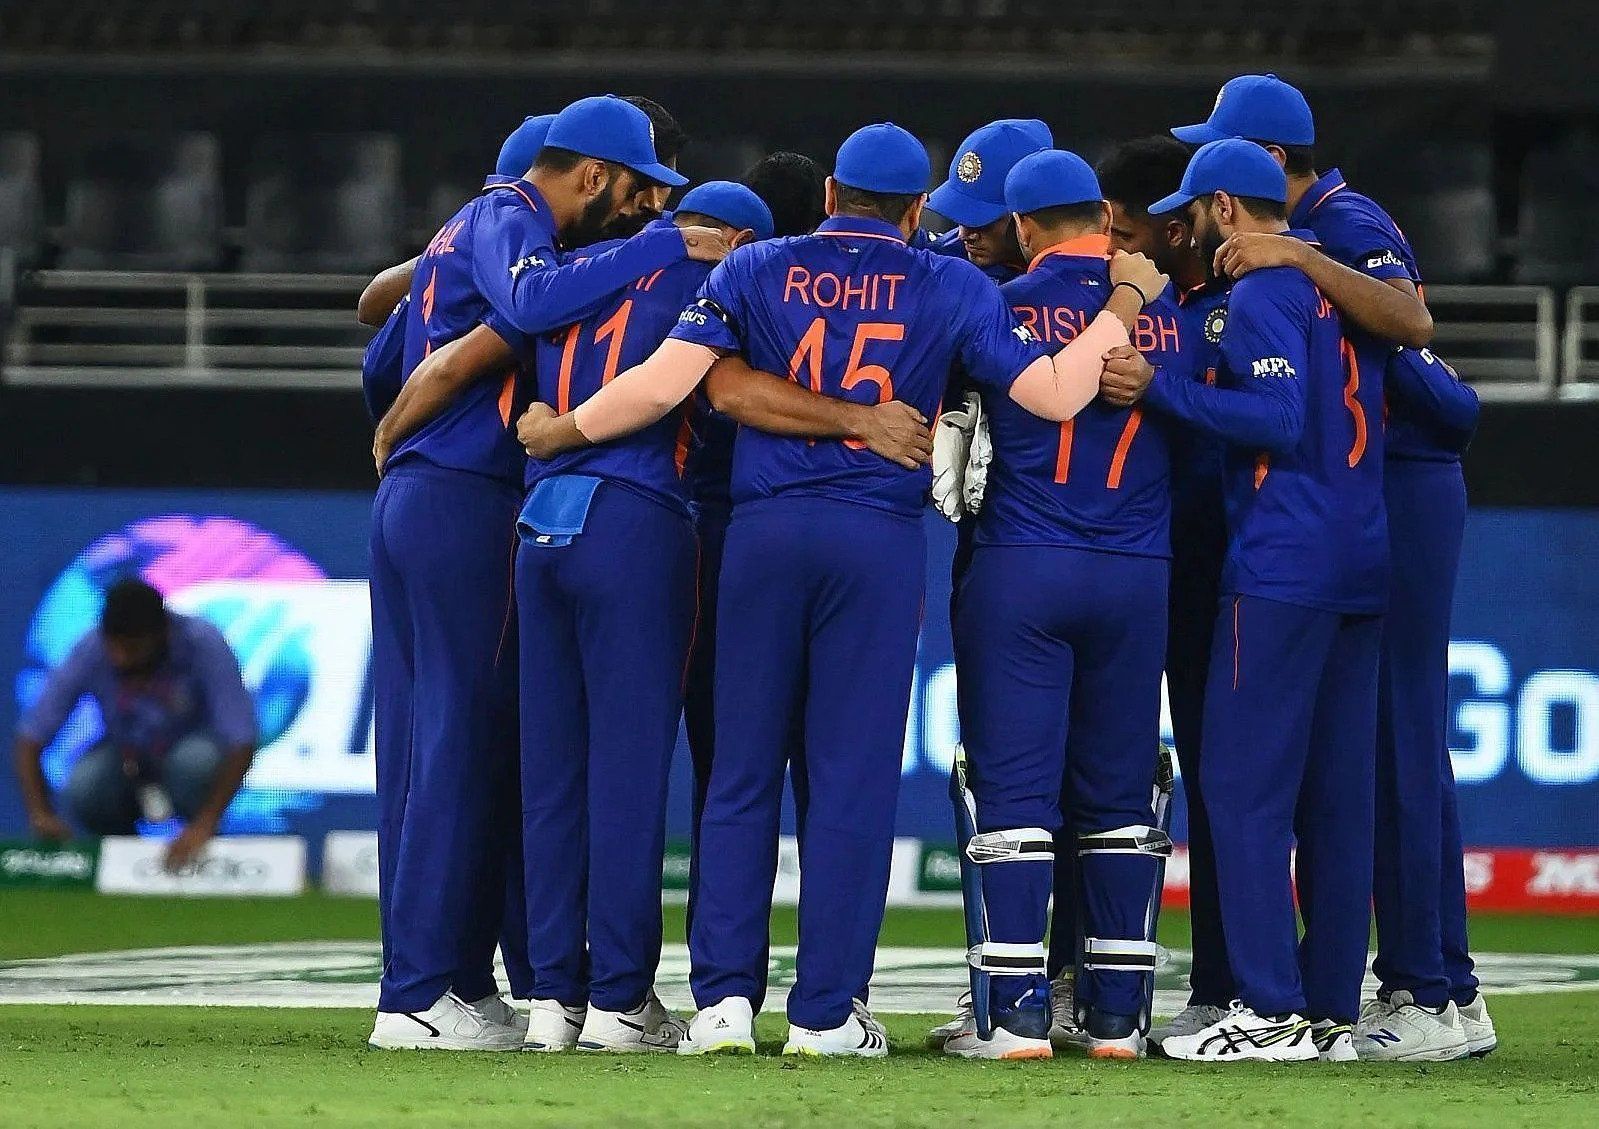 Team India are among the favorites to win the 2022 T20 World Cup in Australia.